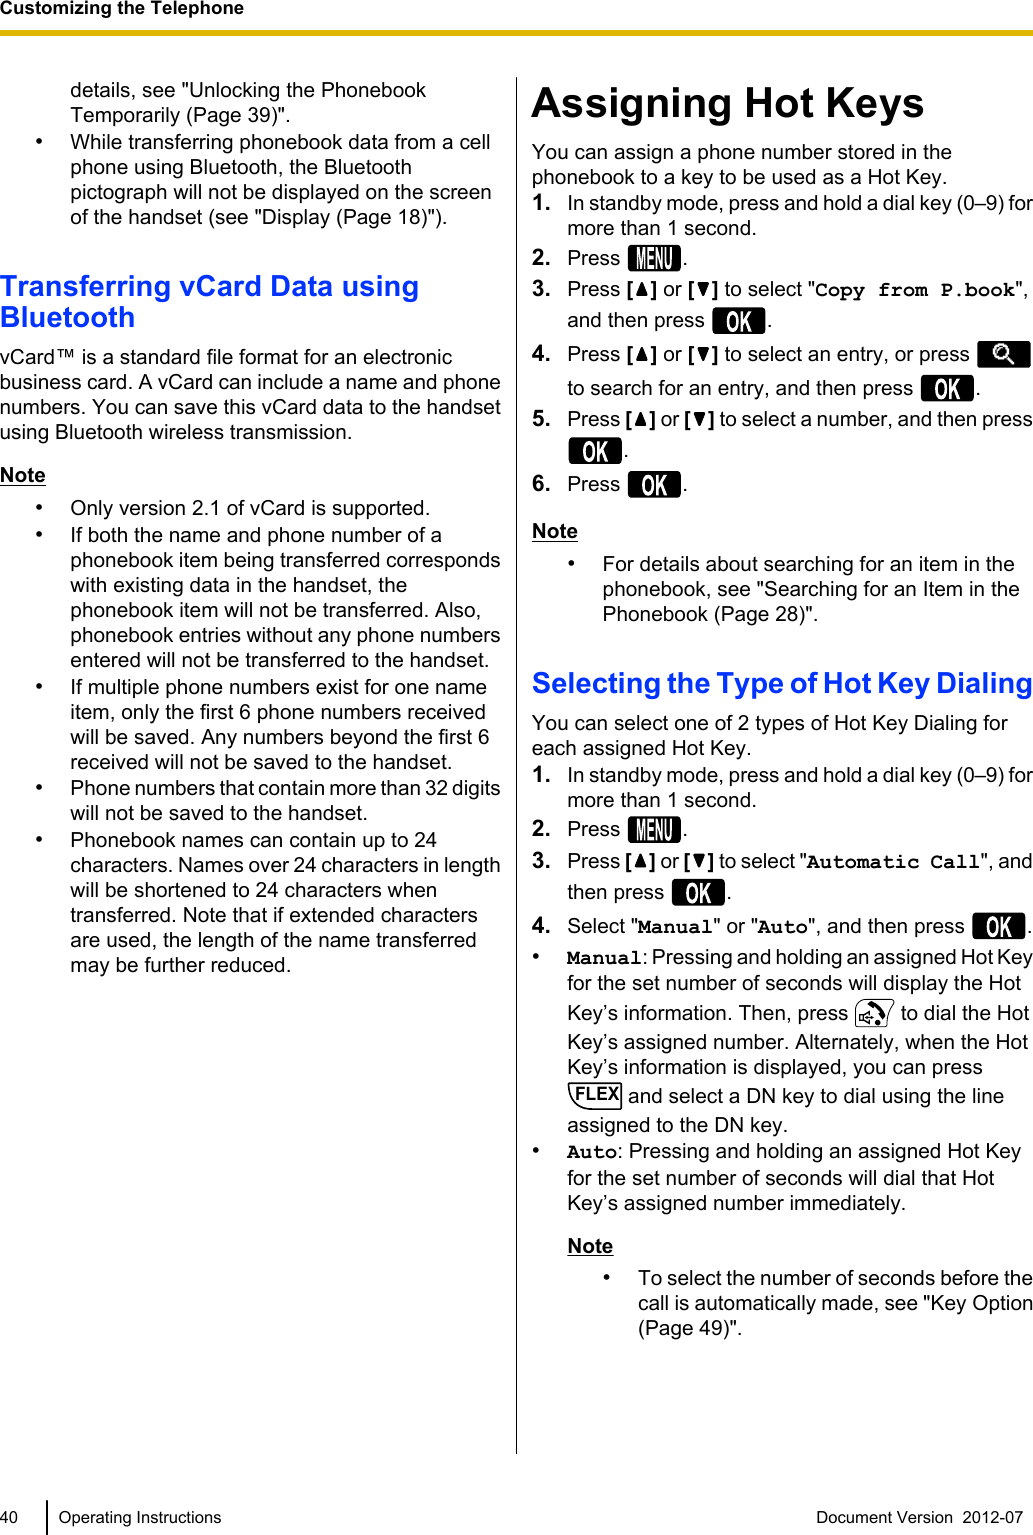 details, see &quot;Unlocking the PhonebookTemporarily (Page 39)&quot;.•While transferring phonebook data from a cellphone using Bluetooth, the Bluetoothpictograph will not be displayed on the screenof the handset (see &quot;Display (Page 18)&quot;).Transferring vCard Data usingBluetoothvCard™ is a standard file format for an electronicbusiness card. A vCard can include a name and phonenumbers. You can save this vCard data to the handsetusing Bluetooth wireless transmission.Note•Only version 2.1 of vCard is supported.•If both the name and phone number of aphonebook item being transferred correspondswith existing data in the handset, thephonebook item will not be transferred. Also,phonebook entries without any phone numbersentered will not be transferred to the handset.•If multiple phone numbers exist for one nameitem, only the first 6 phone numbers receivedwill be saved. Any numbers beyond the first 6received will not be saved to the handset.•Phone numbers that contain more than 32 digitswill not be saved to the handset.•Phonebook names can contain up to 24characters. Names over 24 characters in lengthwill be shortened to 24 characters whentransferred. Note that if extended charactersare used, the length of the name transferredmay be further reduced.Assigning Hot KeysYou can assign a phone number stored in thephonebook to a key to be used as a Hot Key.1. In standby mode, press and hold a dial key (0–9) formore than 1 second.2. Press  .3. Press [] or [ ] to select &quot;Copy from P.book&quot;,and then press  .4. Press [ ] or [ ] to select an entry, or press to search for an entry, and then press  .5. Press [ ] or [ ] to select a number, and then press.6. Press  .Note•For details about searching for an item in thephonebook, see &quot;Searching for an Item in thePhonebook (Page 28)&quot;.Selecting the Type of Hot Key DialingYou can select one of 2 types of Hot Key Dialing foreach assigned Hot Key.1. In standby mode, press and hold a dial key (0–9) formore than 1 second.2. Press  .3. Press [ ] or [ ] to select &quot;Automatic Call&quot;, andthen press  .4. Select &quot;Manual&quot; or &quot;Auto&quot;, and then press  .•Manual: Pressing and holding an assigned Hot Keyfor the set number of seconds will display the HotKey’s information. Then, press   to dial the HotKey’s assigned number. Alternately, when the HotKey’s information is displayed, you can pressFLEX and select a DN key to dial using the lineassigned to the DN key.•Auto: Pressing and holding an assigned Hot Keyfor the set number of seconds will dial that HotKey’s assigned number immediately.Note•To select the number of seconds before thecall is automatically made, see &quot;Key Option(Page 49)&quot;.40 Operating Instructions Document Version  2012-07  Customizing the Telephone